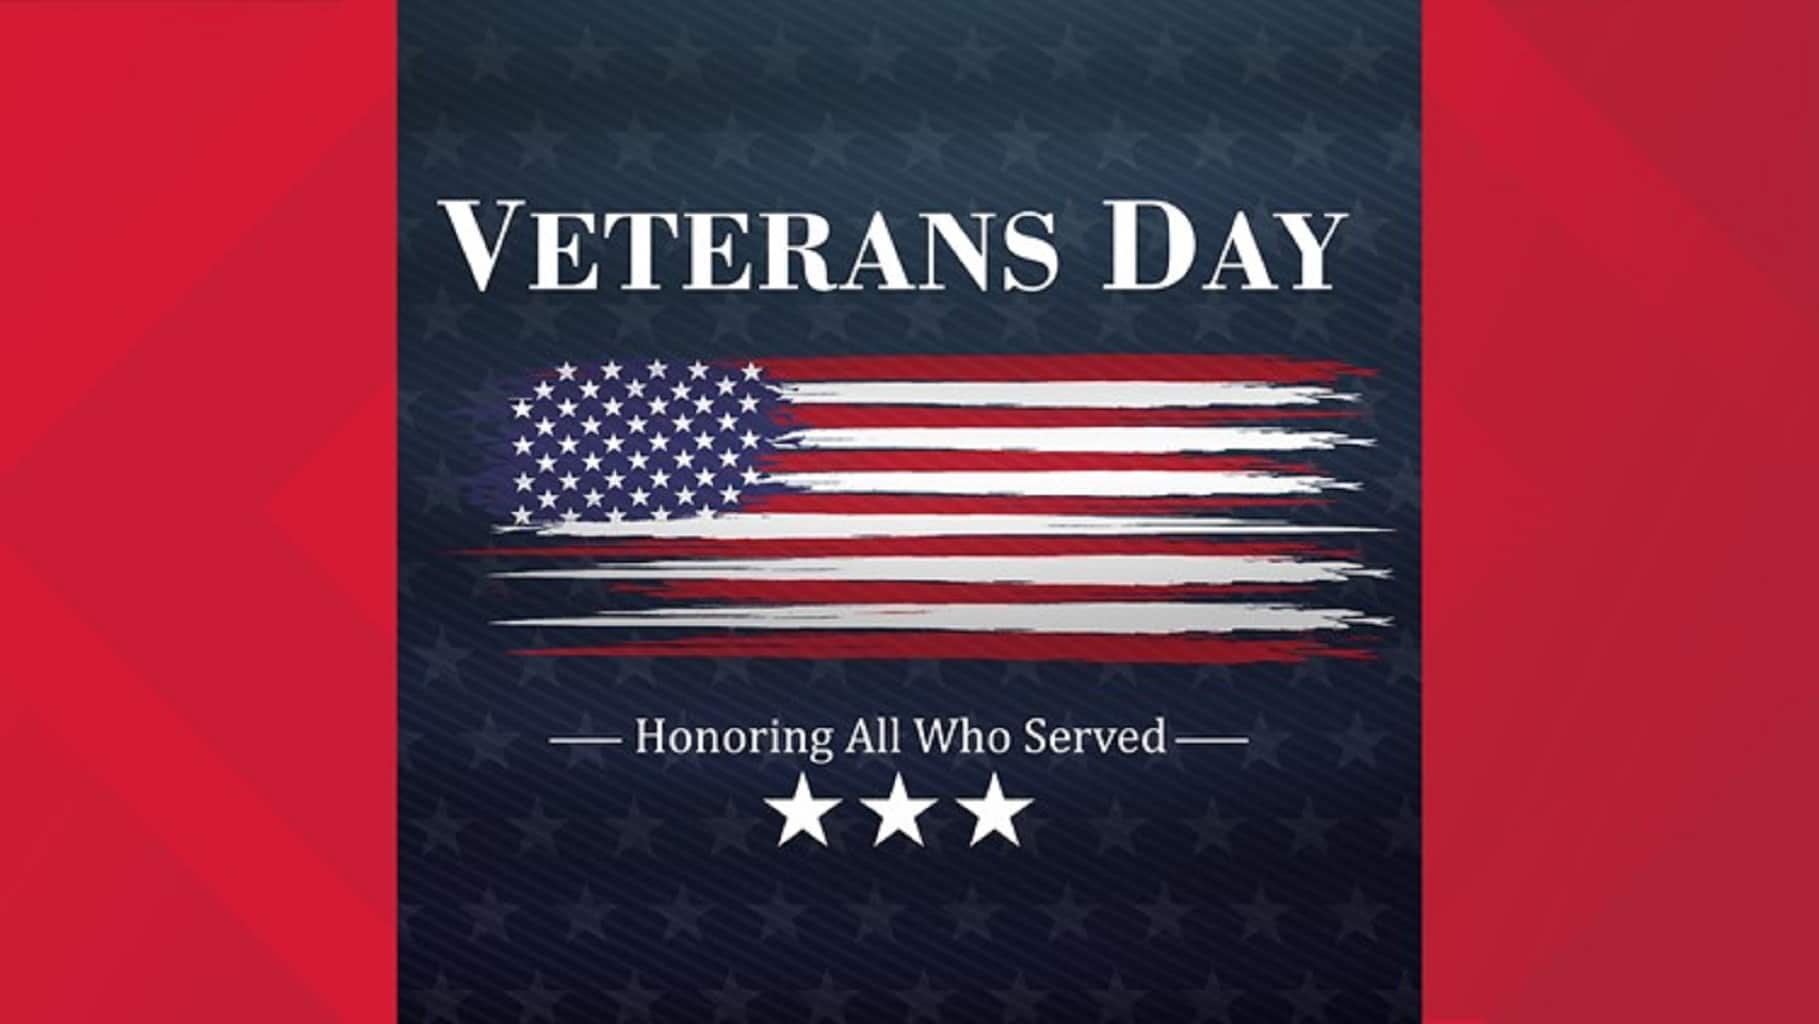 Thank you to our veterans for your service to our country Whitewater